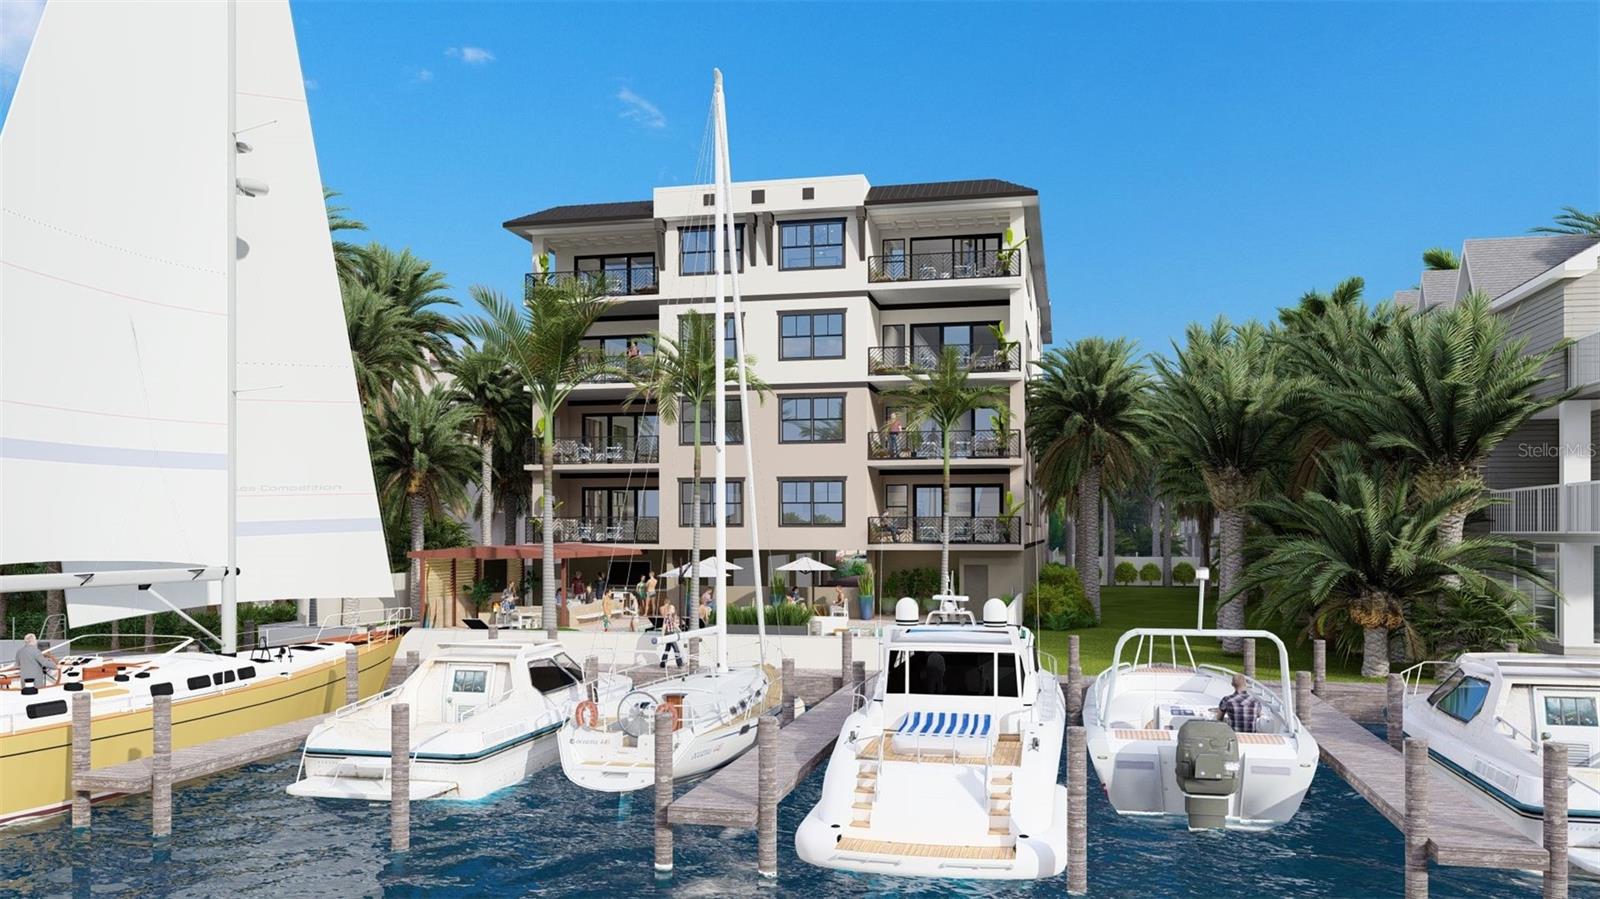 QUIET COVE! A Boaters Paradise! The beautiful NEW condominium development on Tierra Verde comes with a 50' boat slip! Digital Rendering.